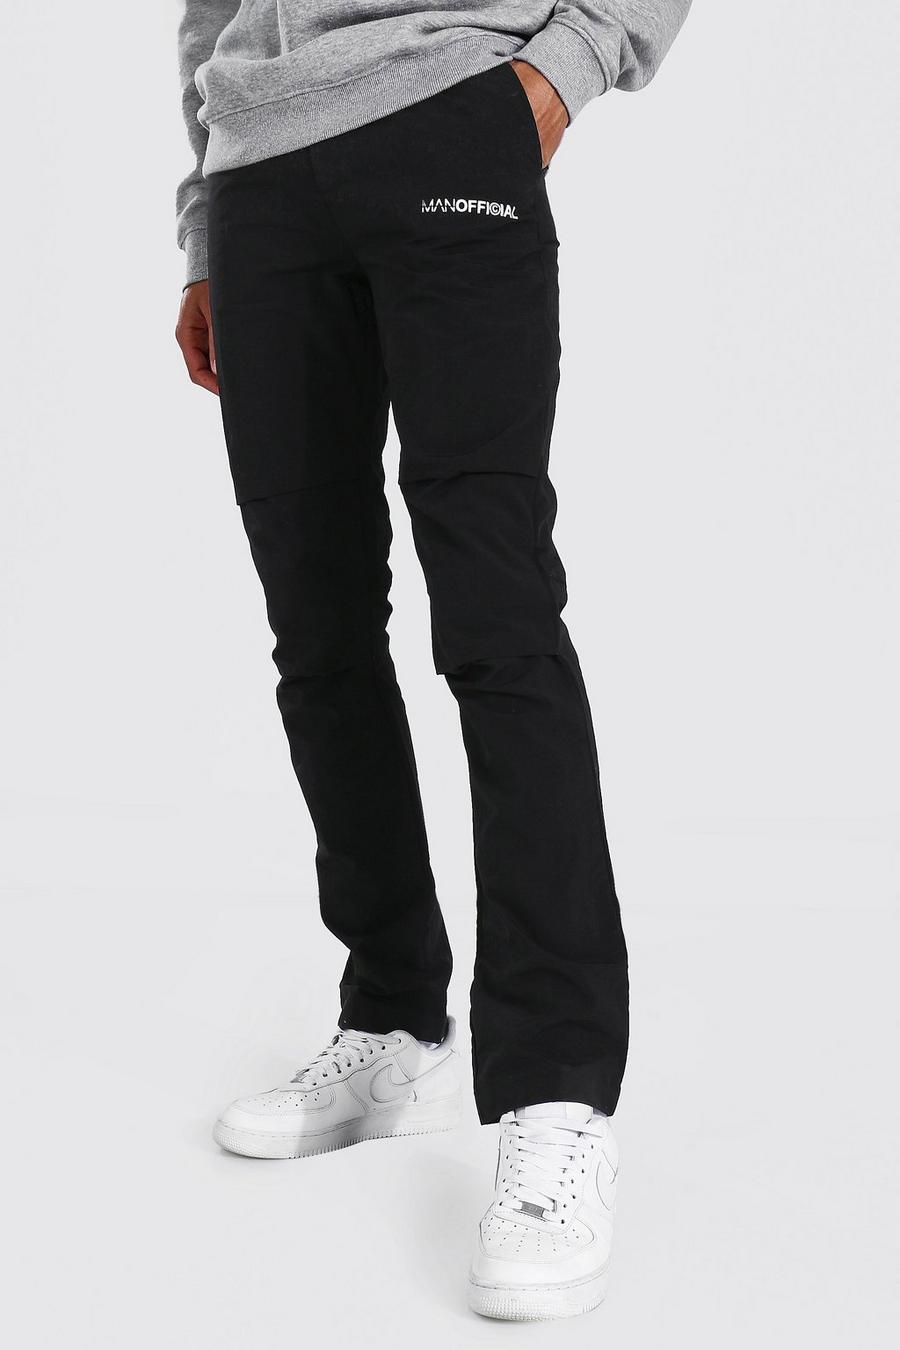 Black Tall Man Official Crinkle Shell Cargo Pants image number 1